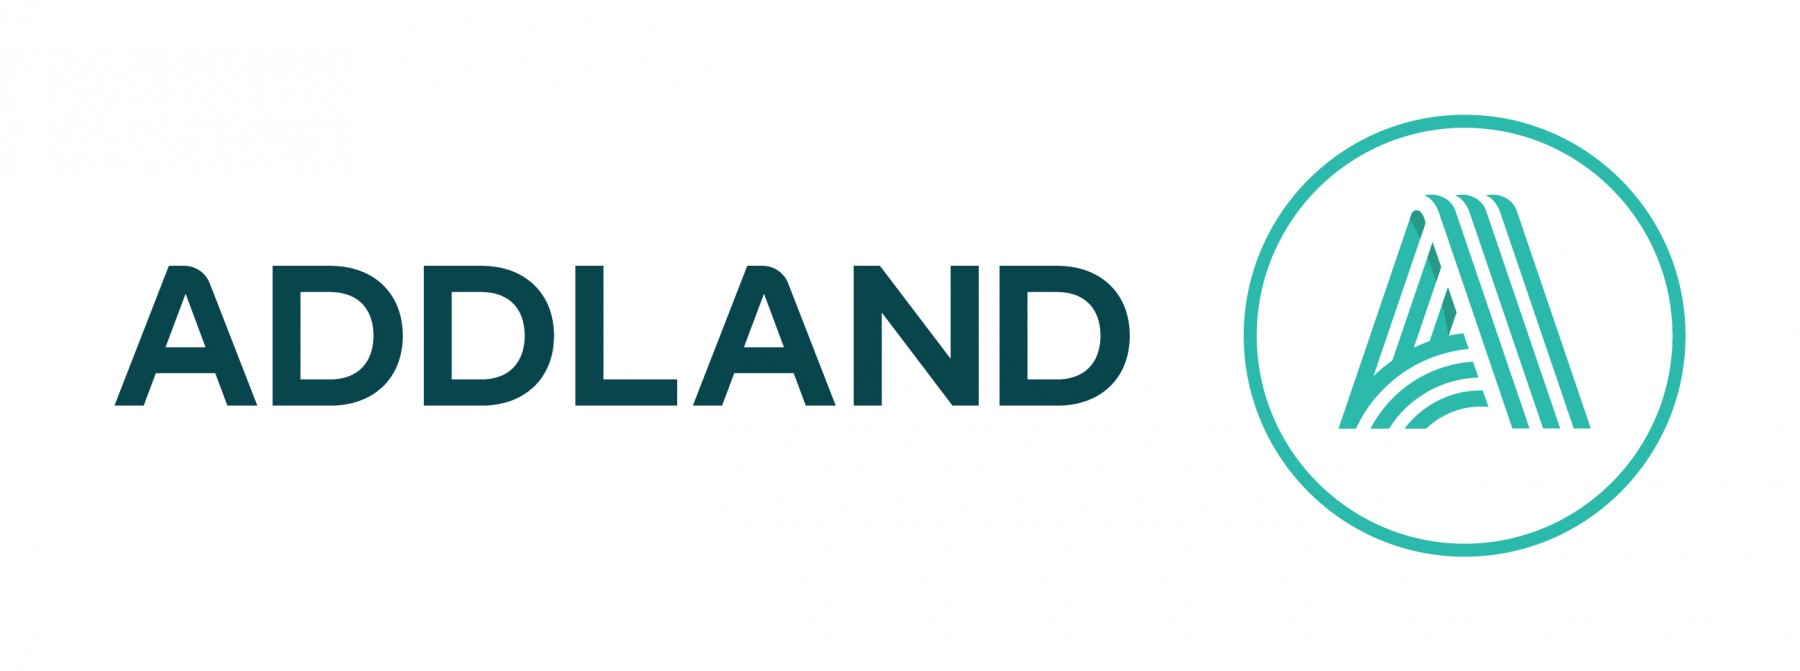 Addland logo - one of RH&Co's copywriting clients